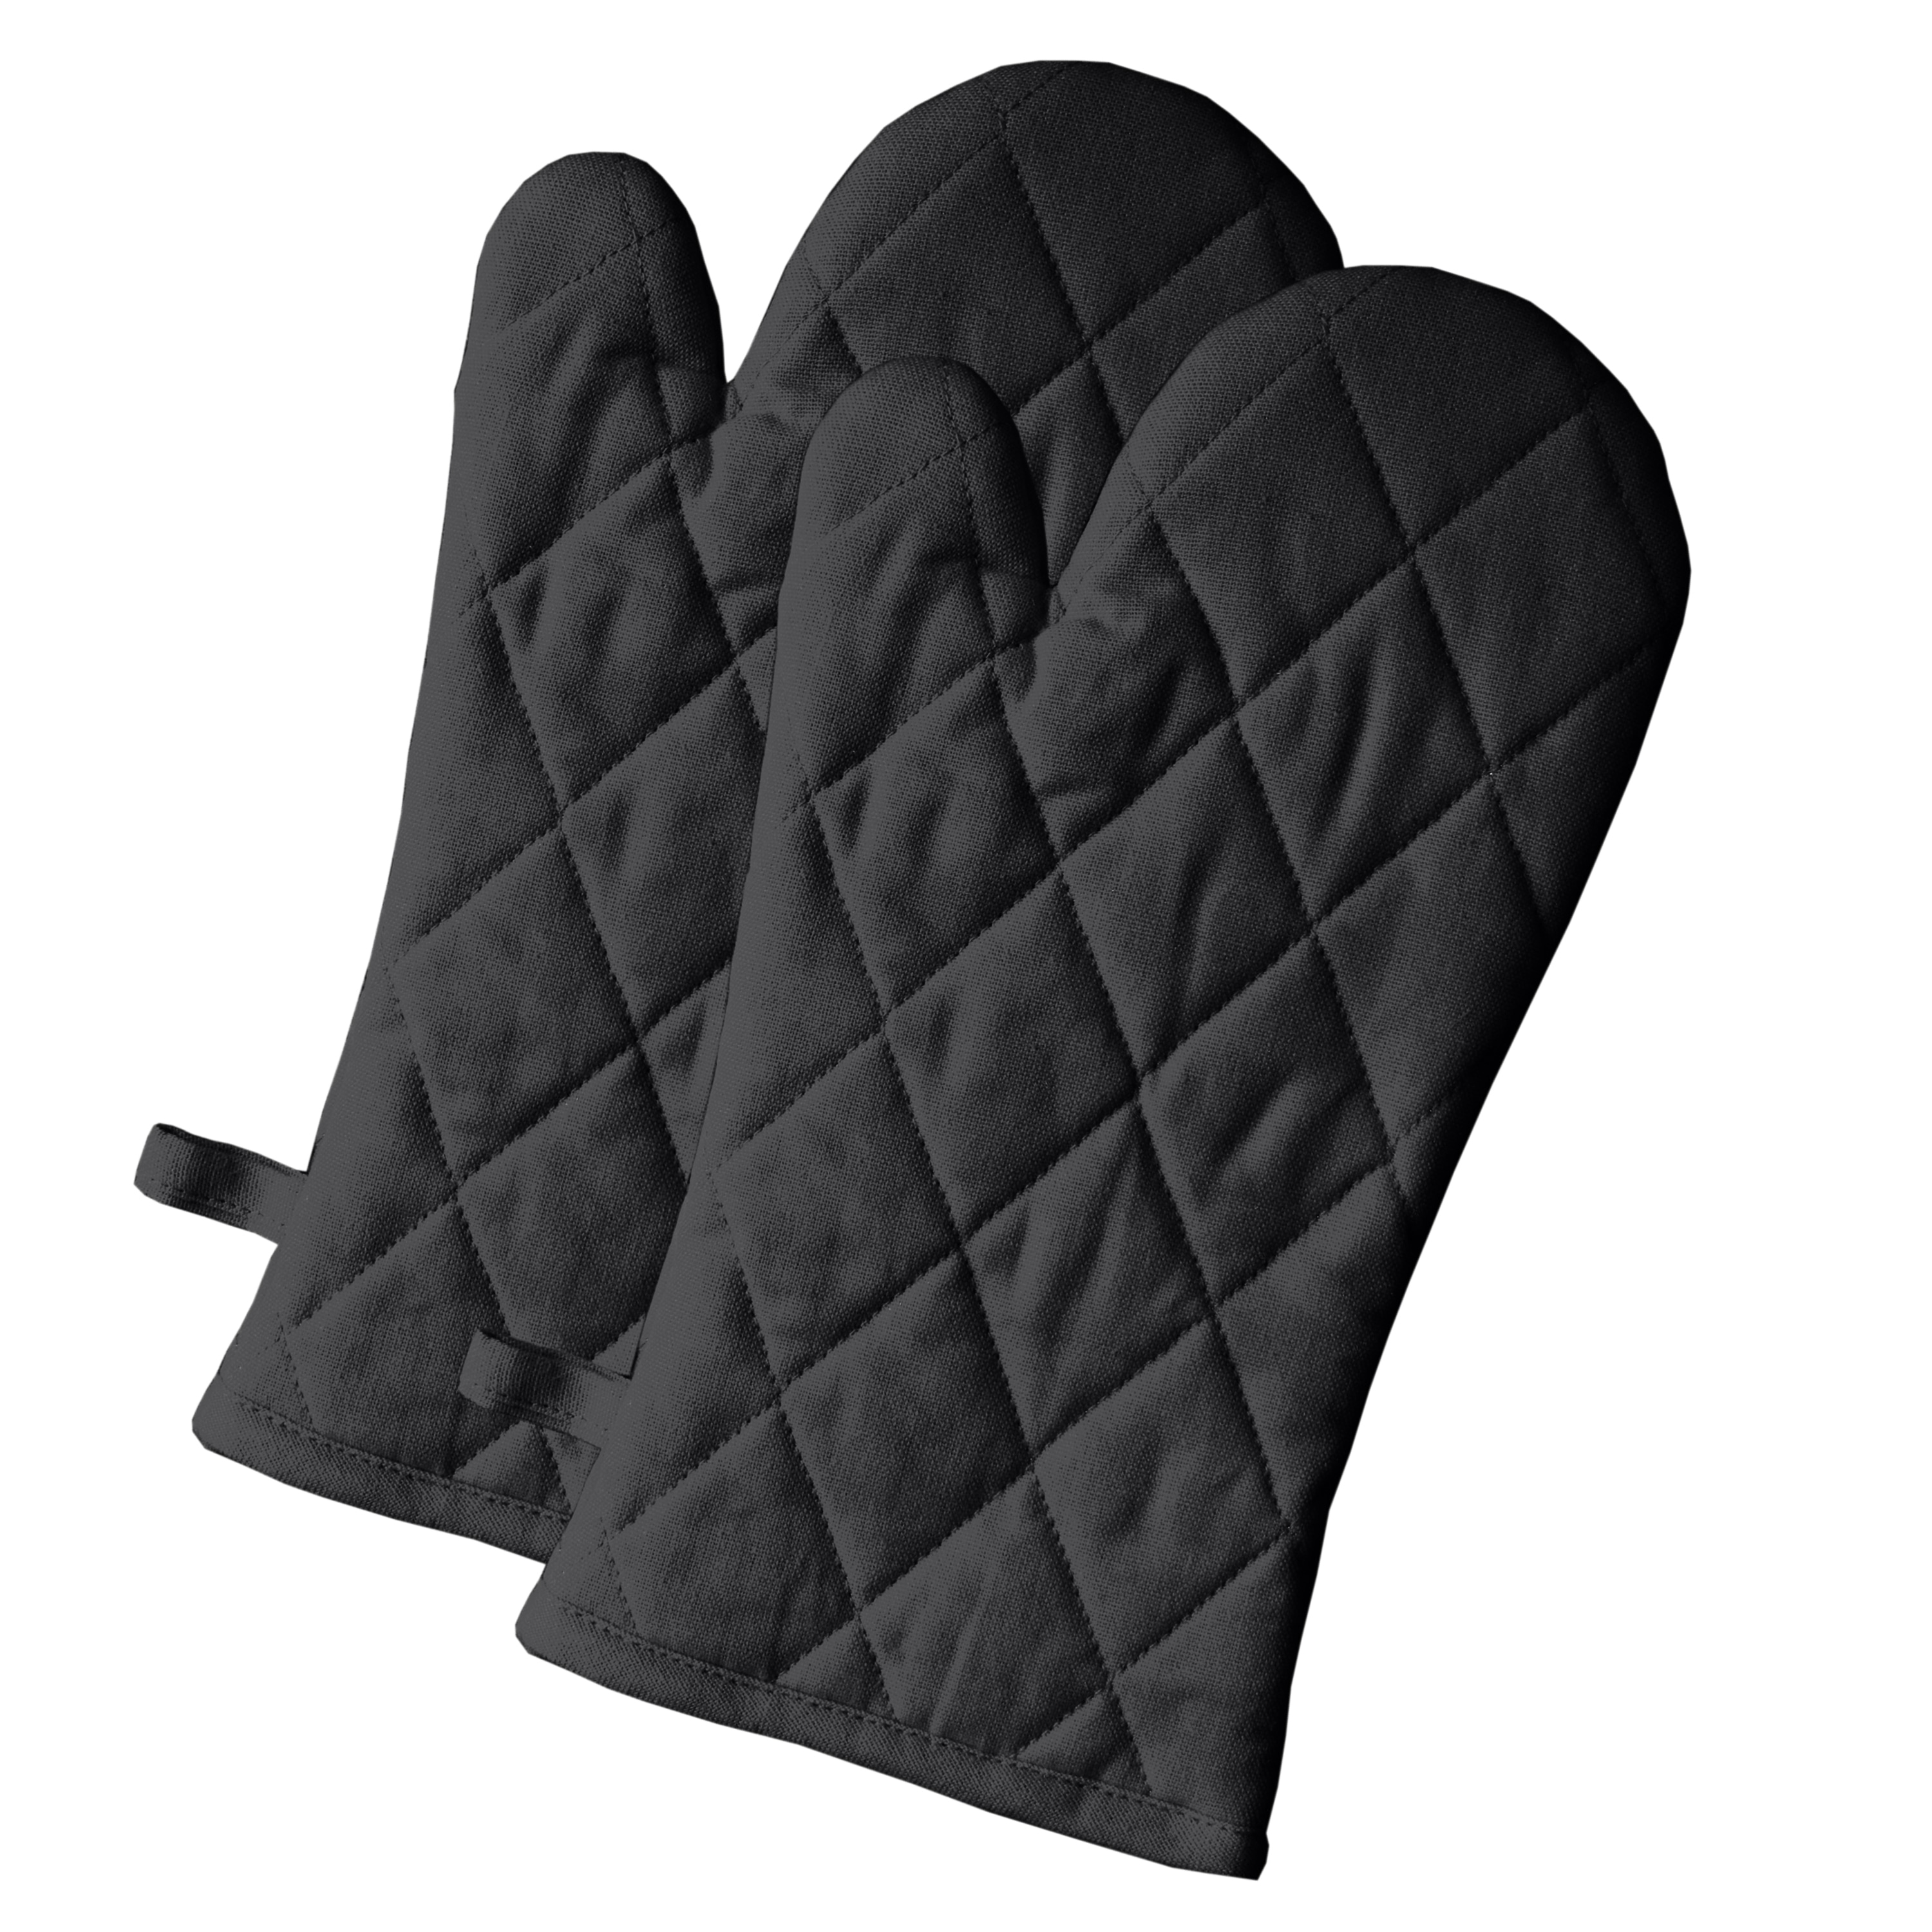 https://ak1.ostkcdn.com/images/products/is/images/direct/030115a231cb8c5ad397d305d0e0c53d50eee9c0/Fabstyles-Solo-Waffle-Cotton-Oven-Mitt-Set-of-2.jpg